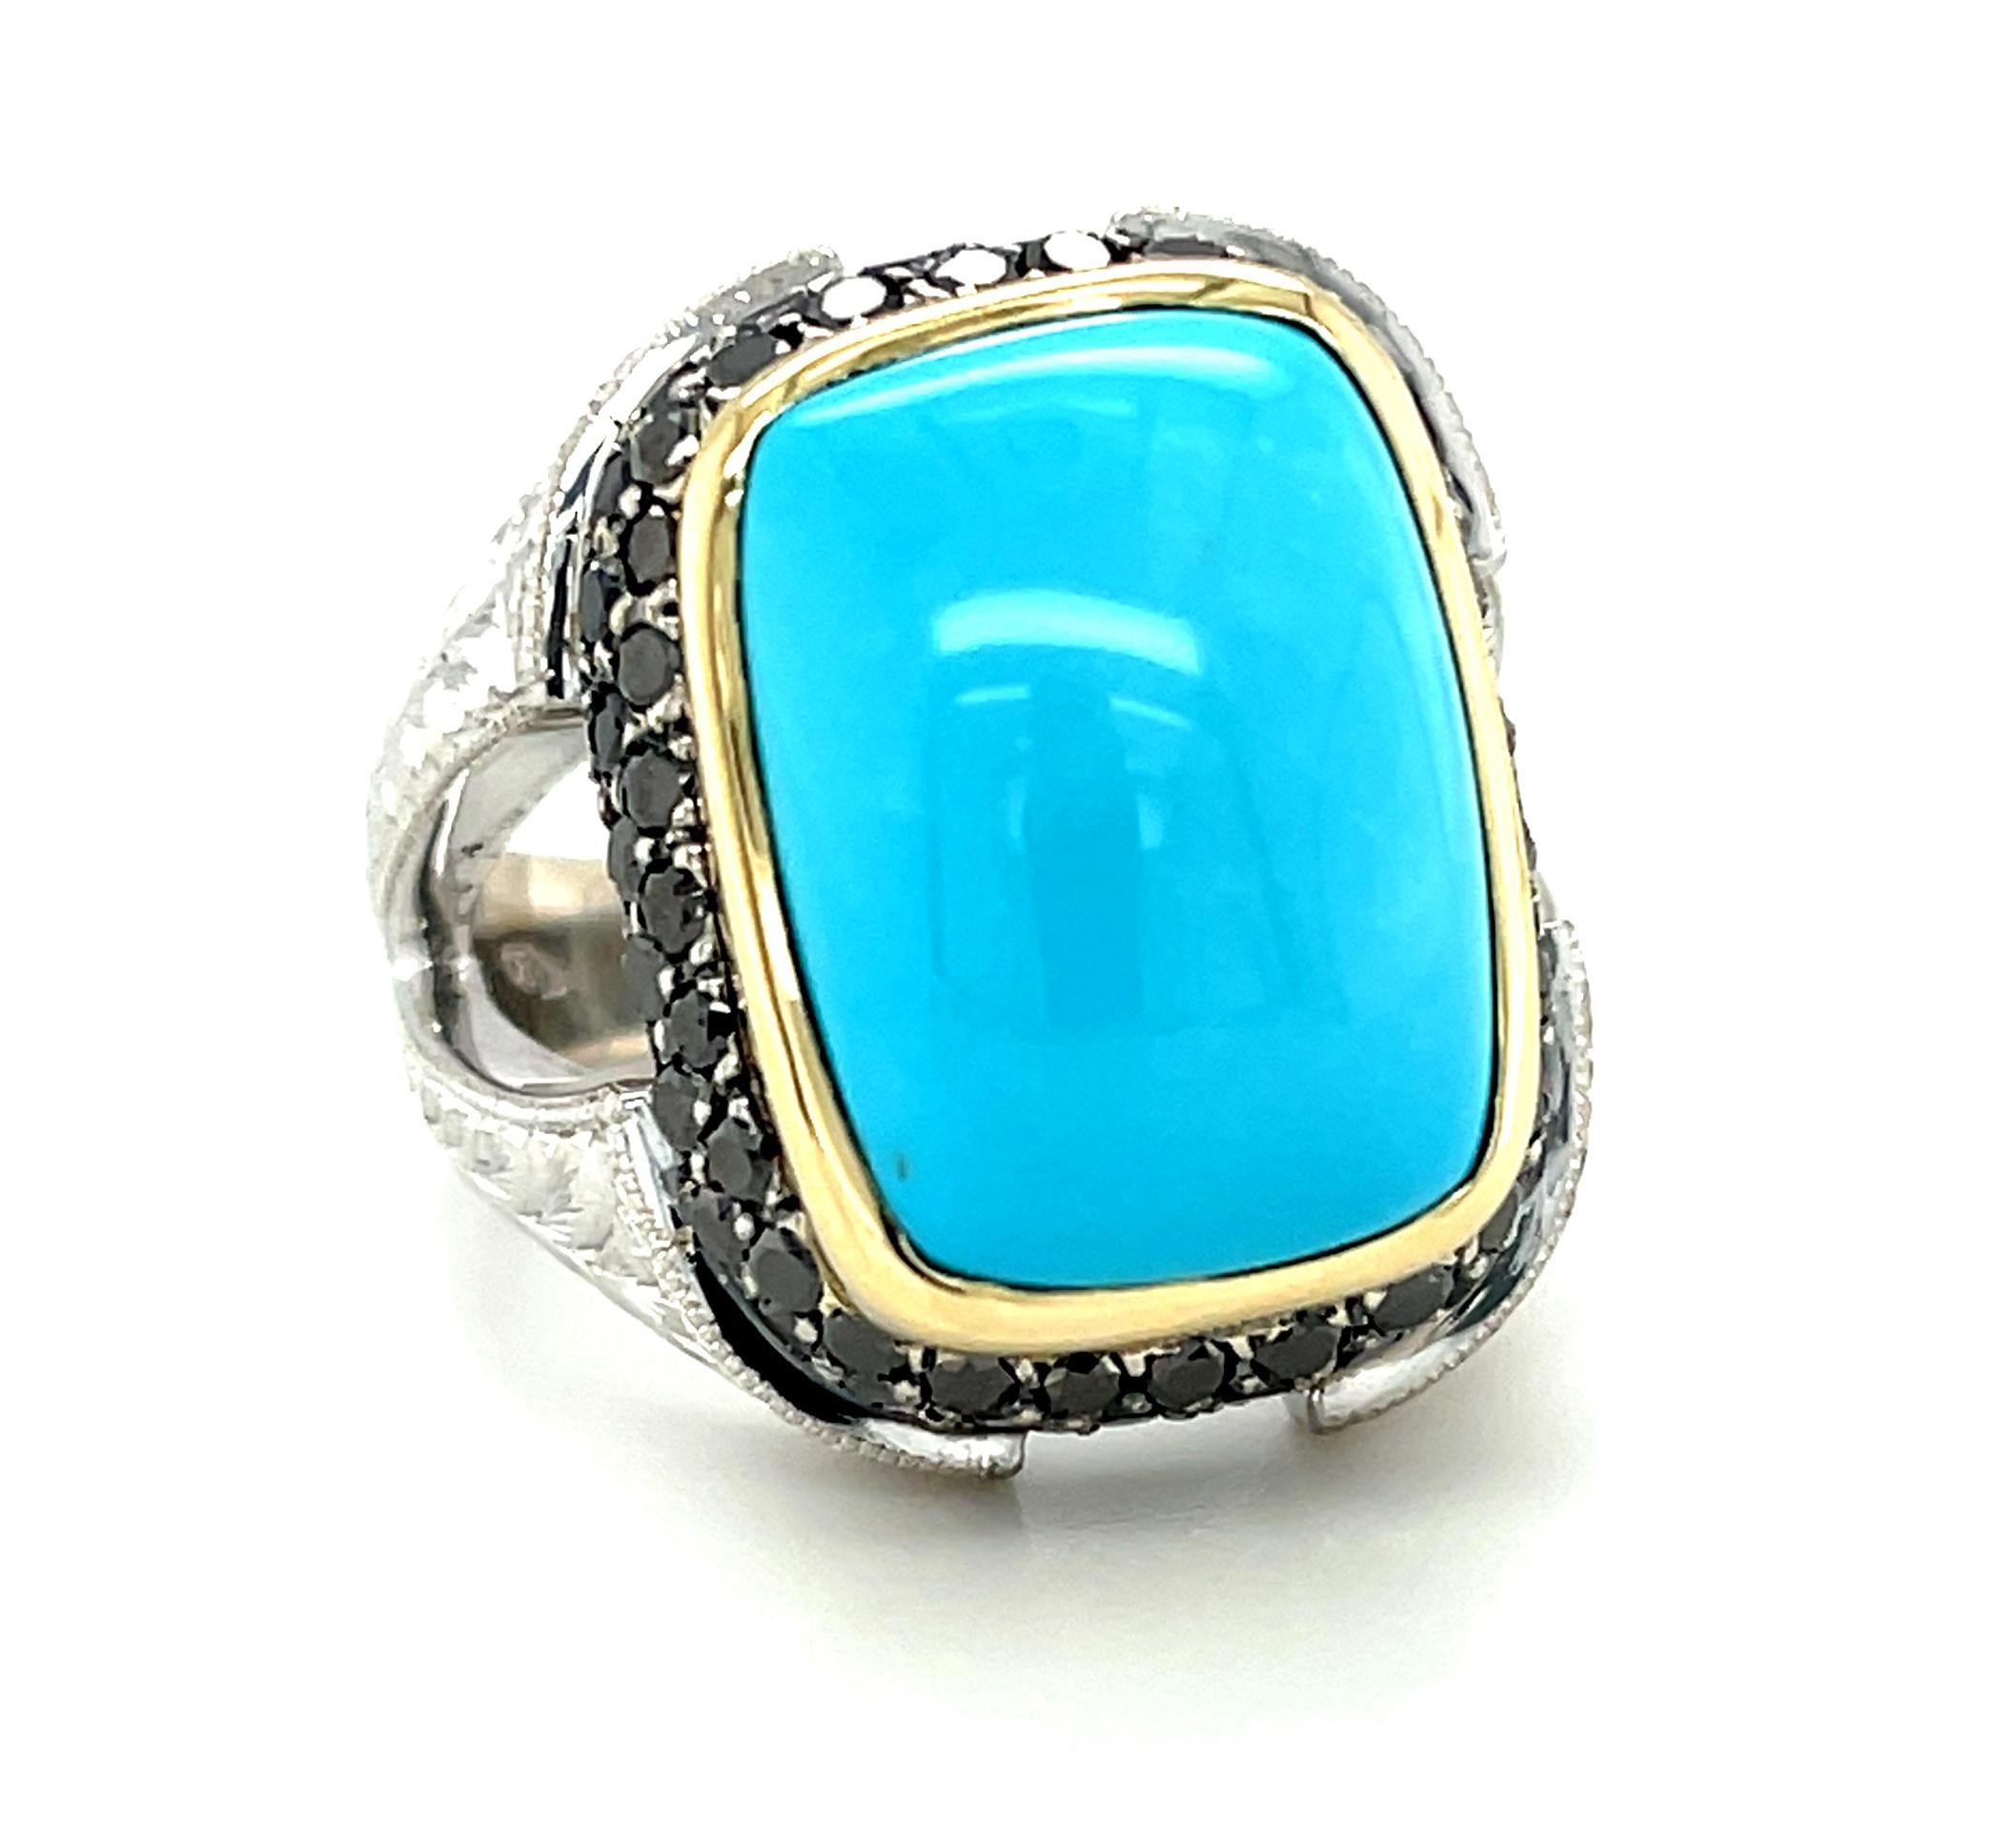 This stunning statement ring features an exquisite, 11.09 carat gem from the renowned Sleeping Beauty turquoise mine! Arizona's Sleeping Beauty mine is home to the finest 